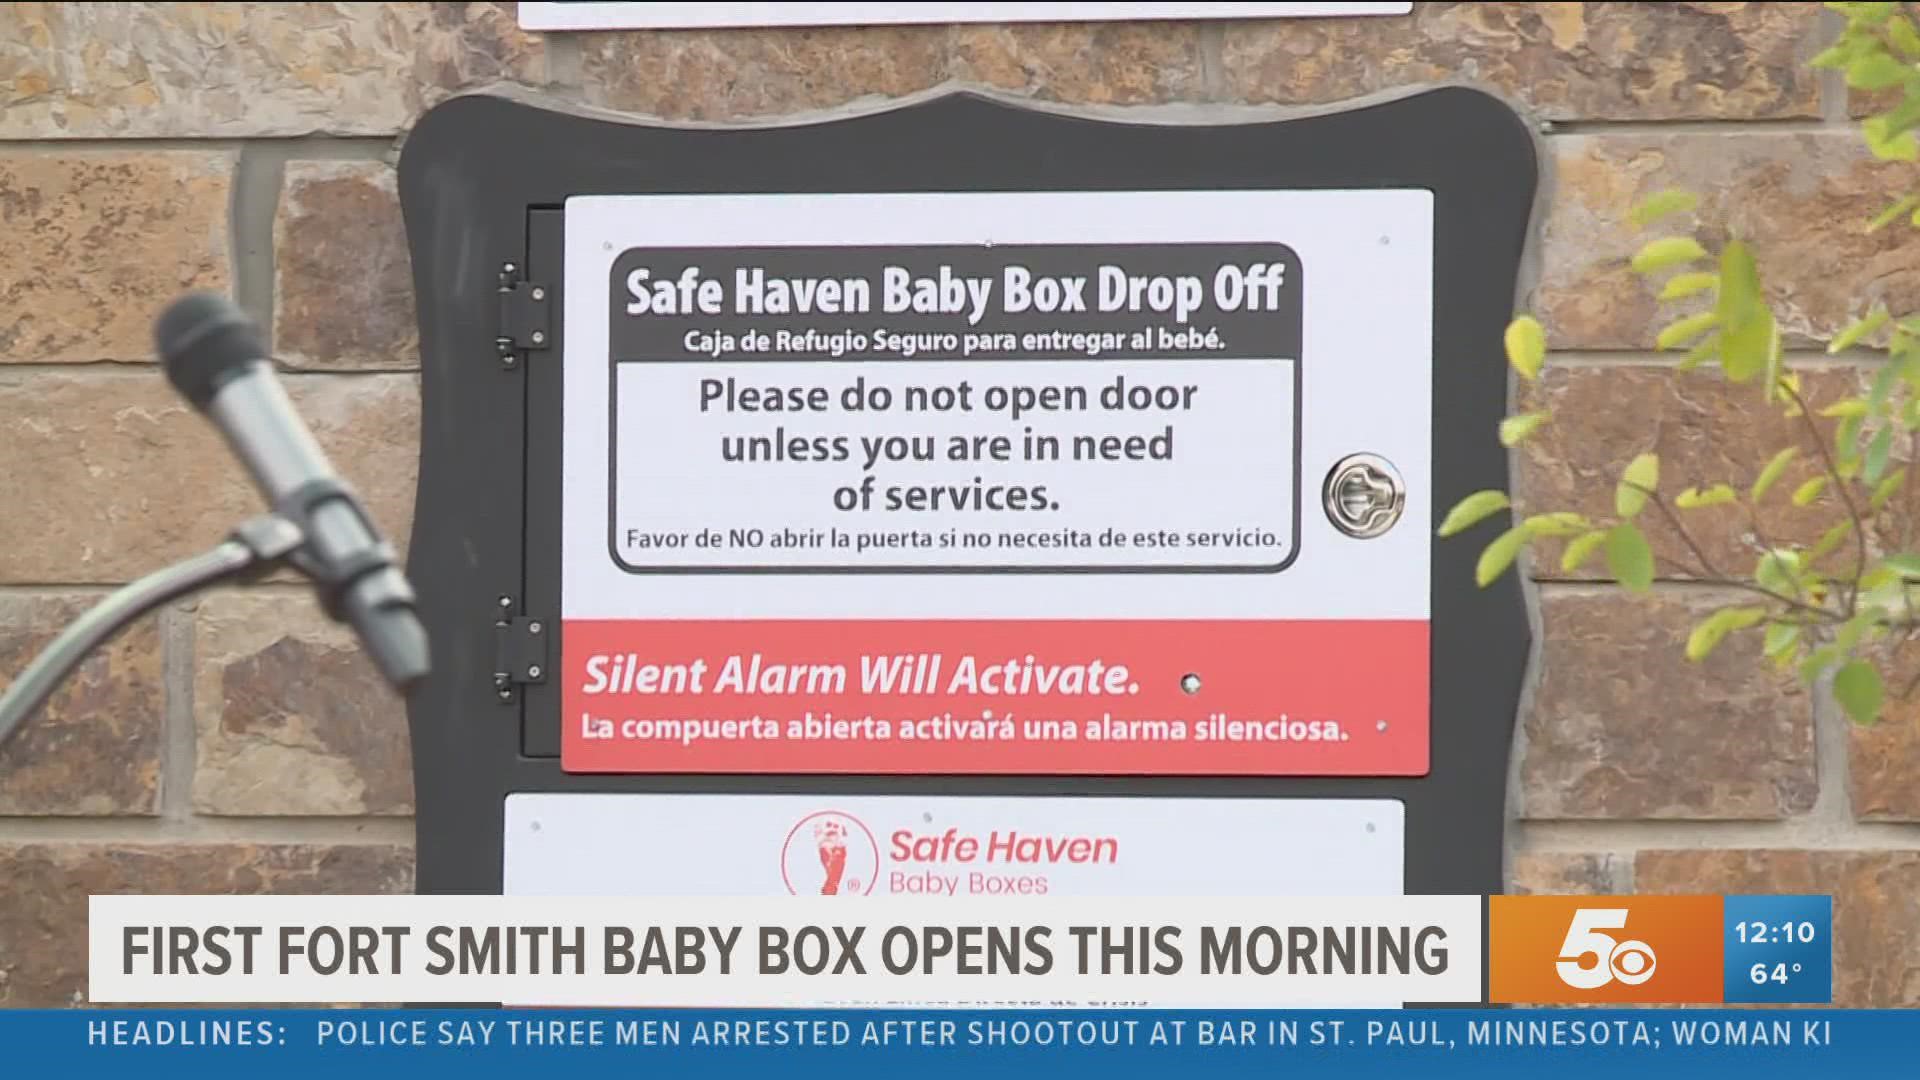 Parents in need in the River Valley now have access to the Safe Haven Baby Box.